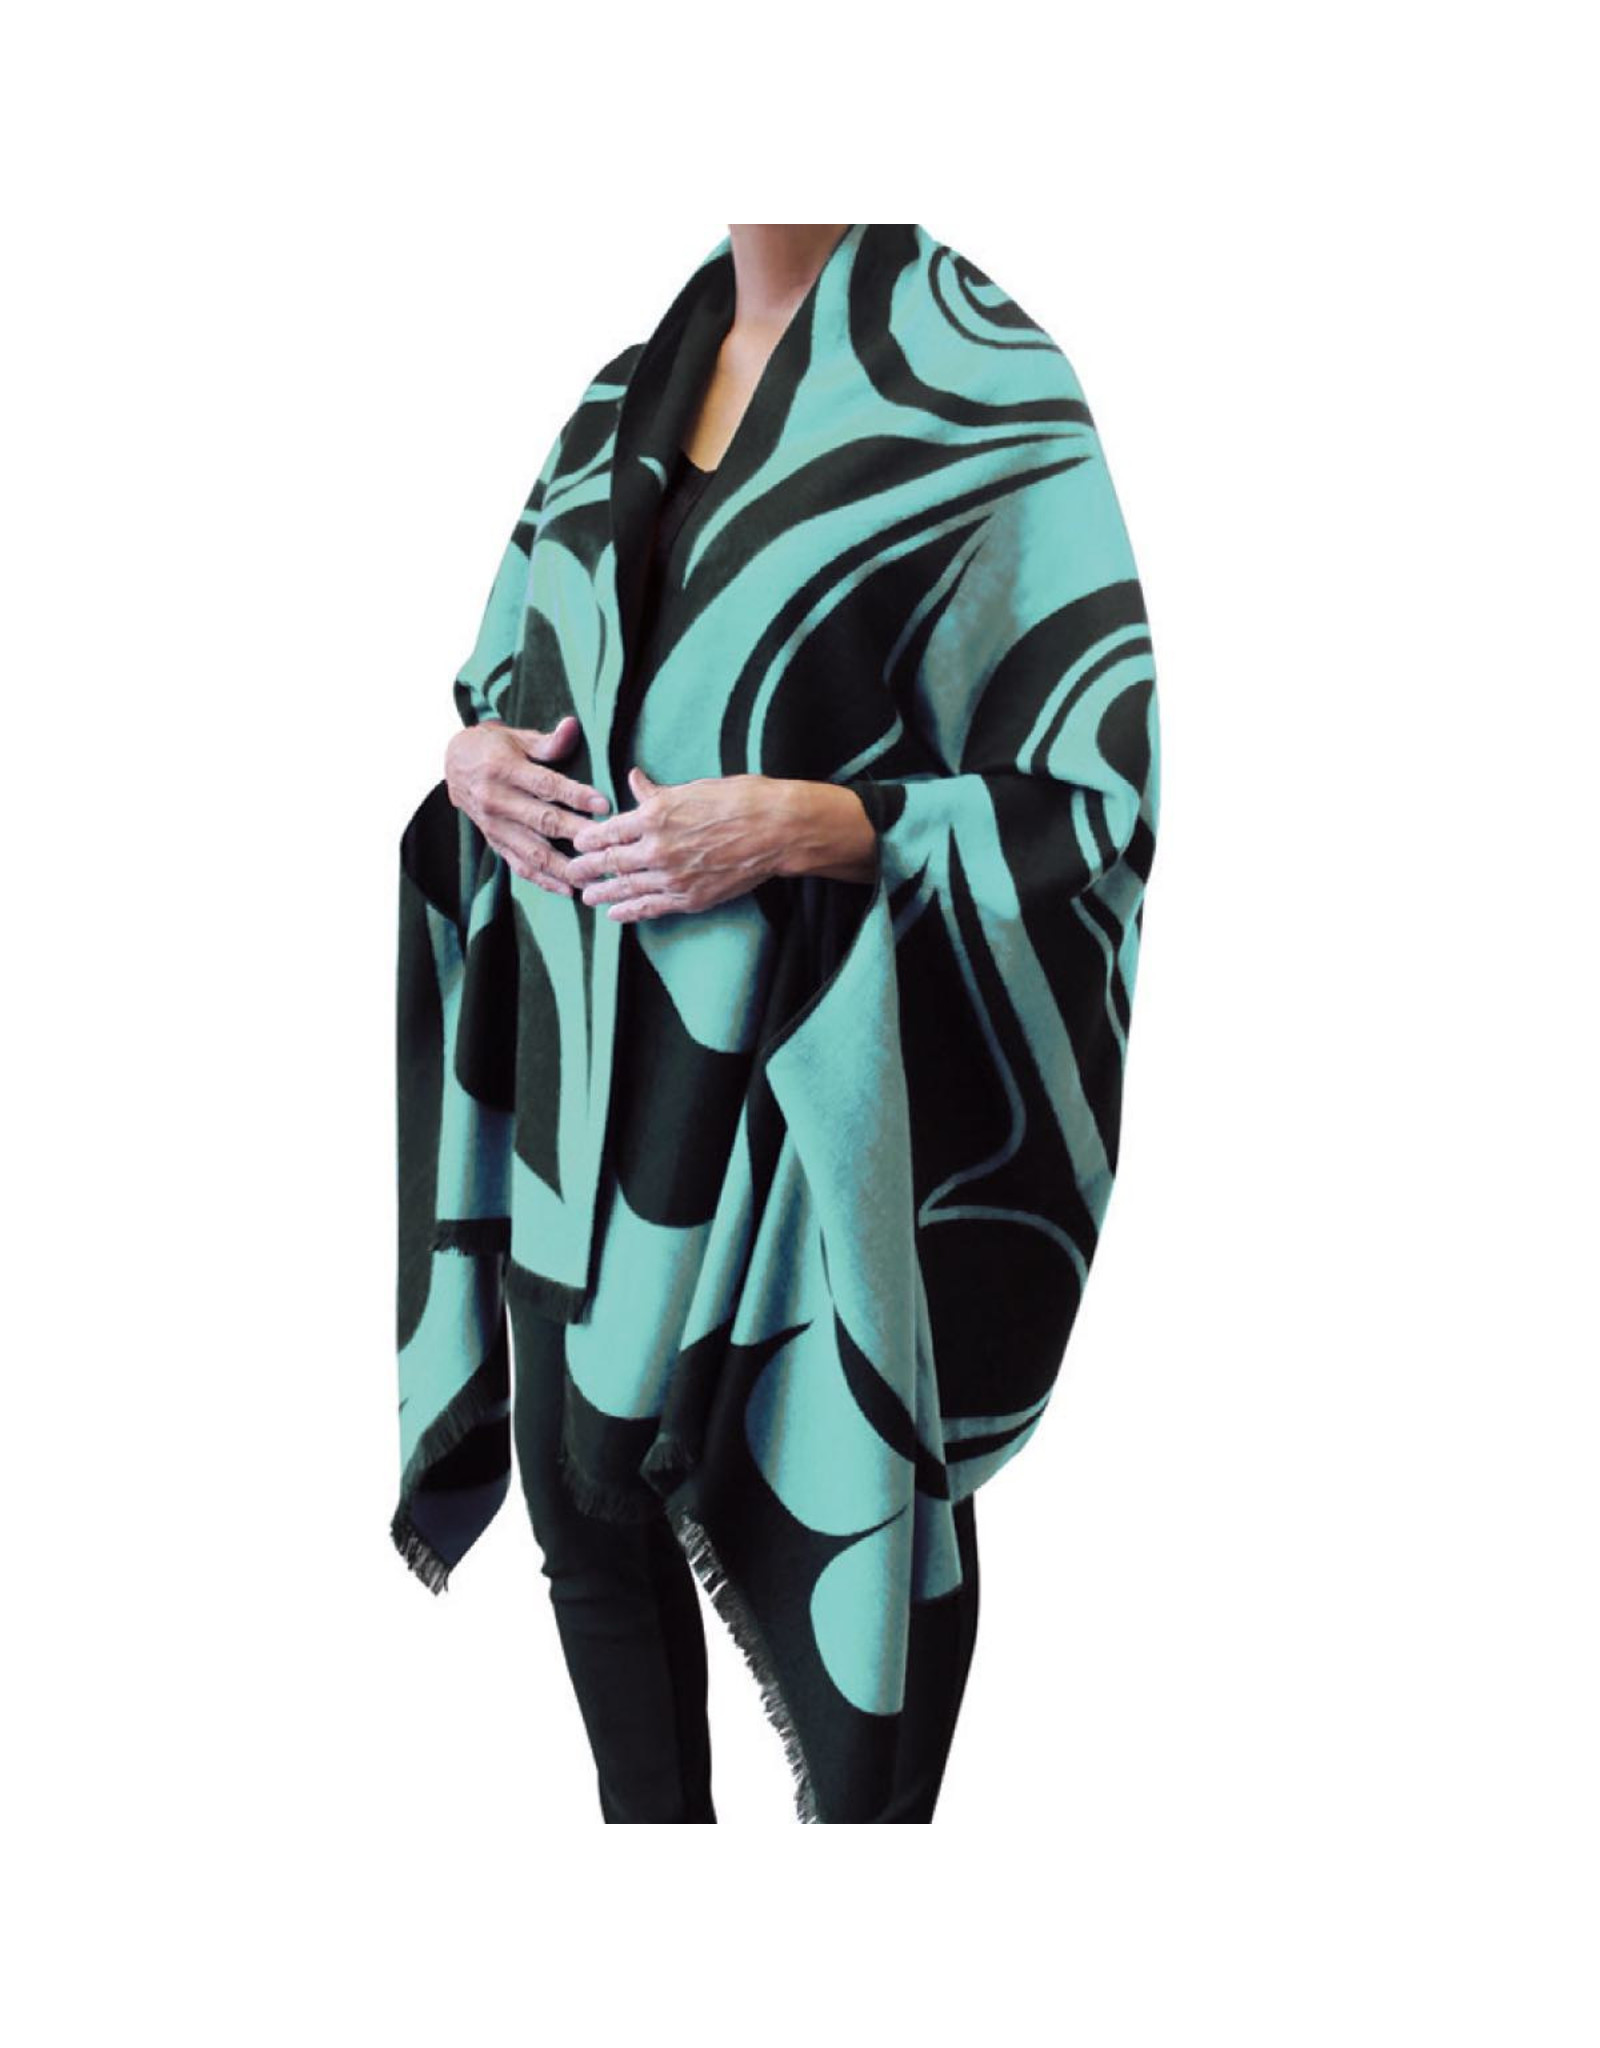 Reversible Fashion Cape - Eagle by Roger Smith (teal & black)